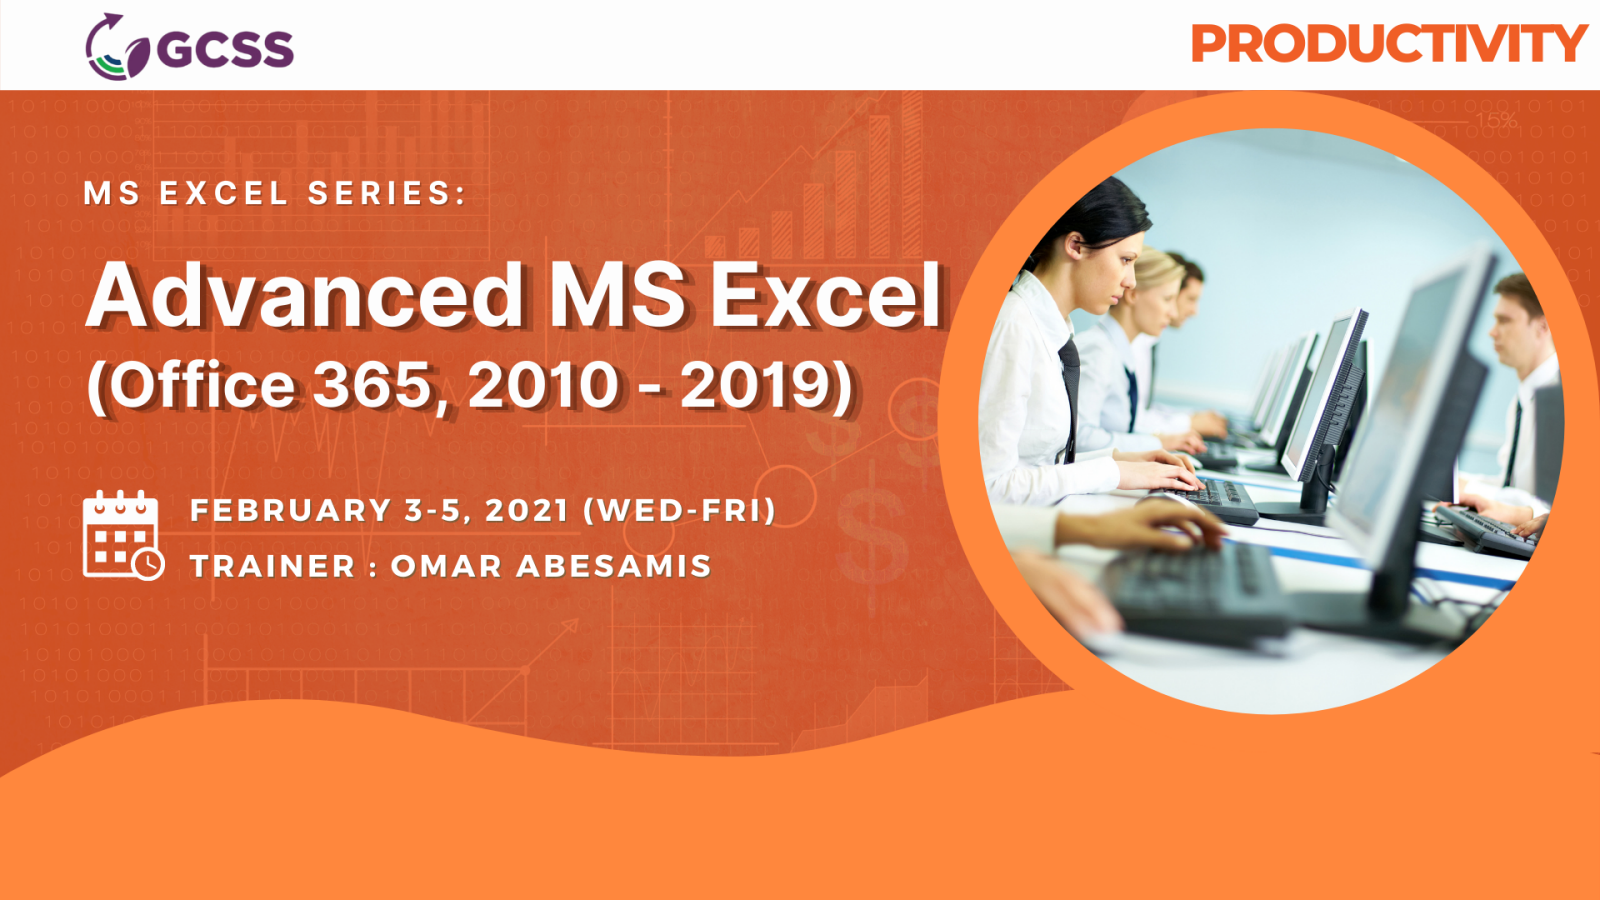 Advanced MS Excel (Office 365, 2010-2019), Manila, National Capital Region, Philippines